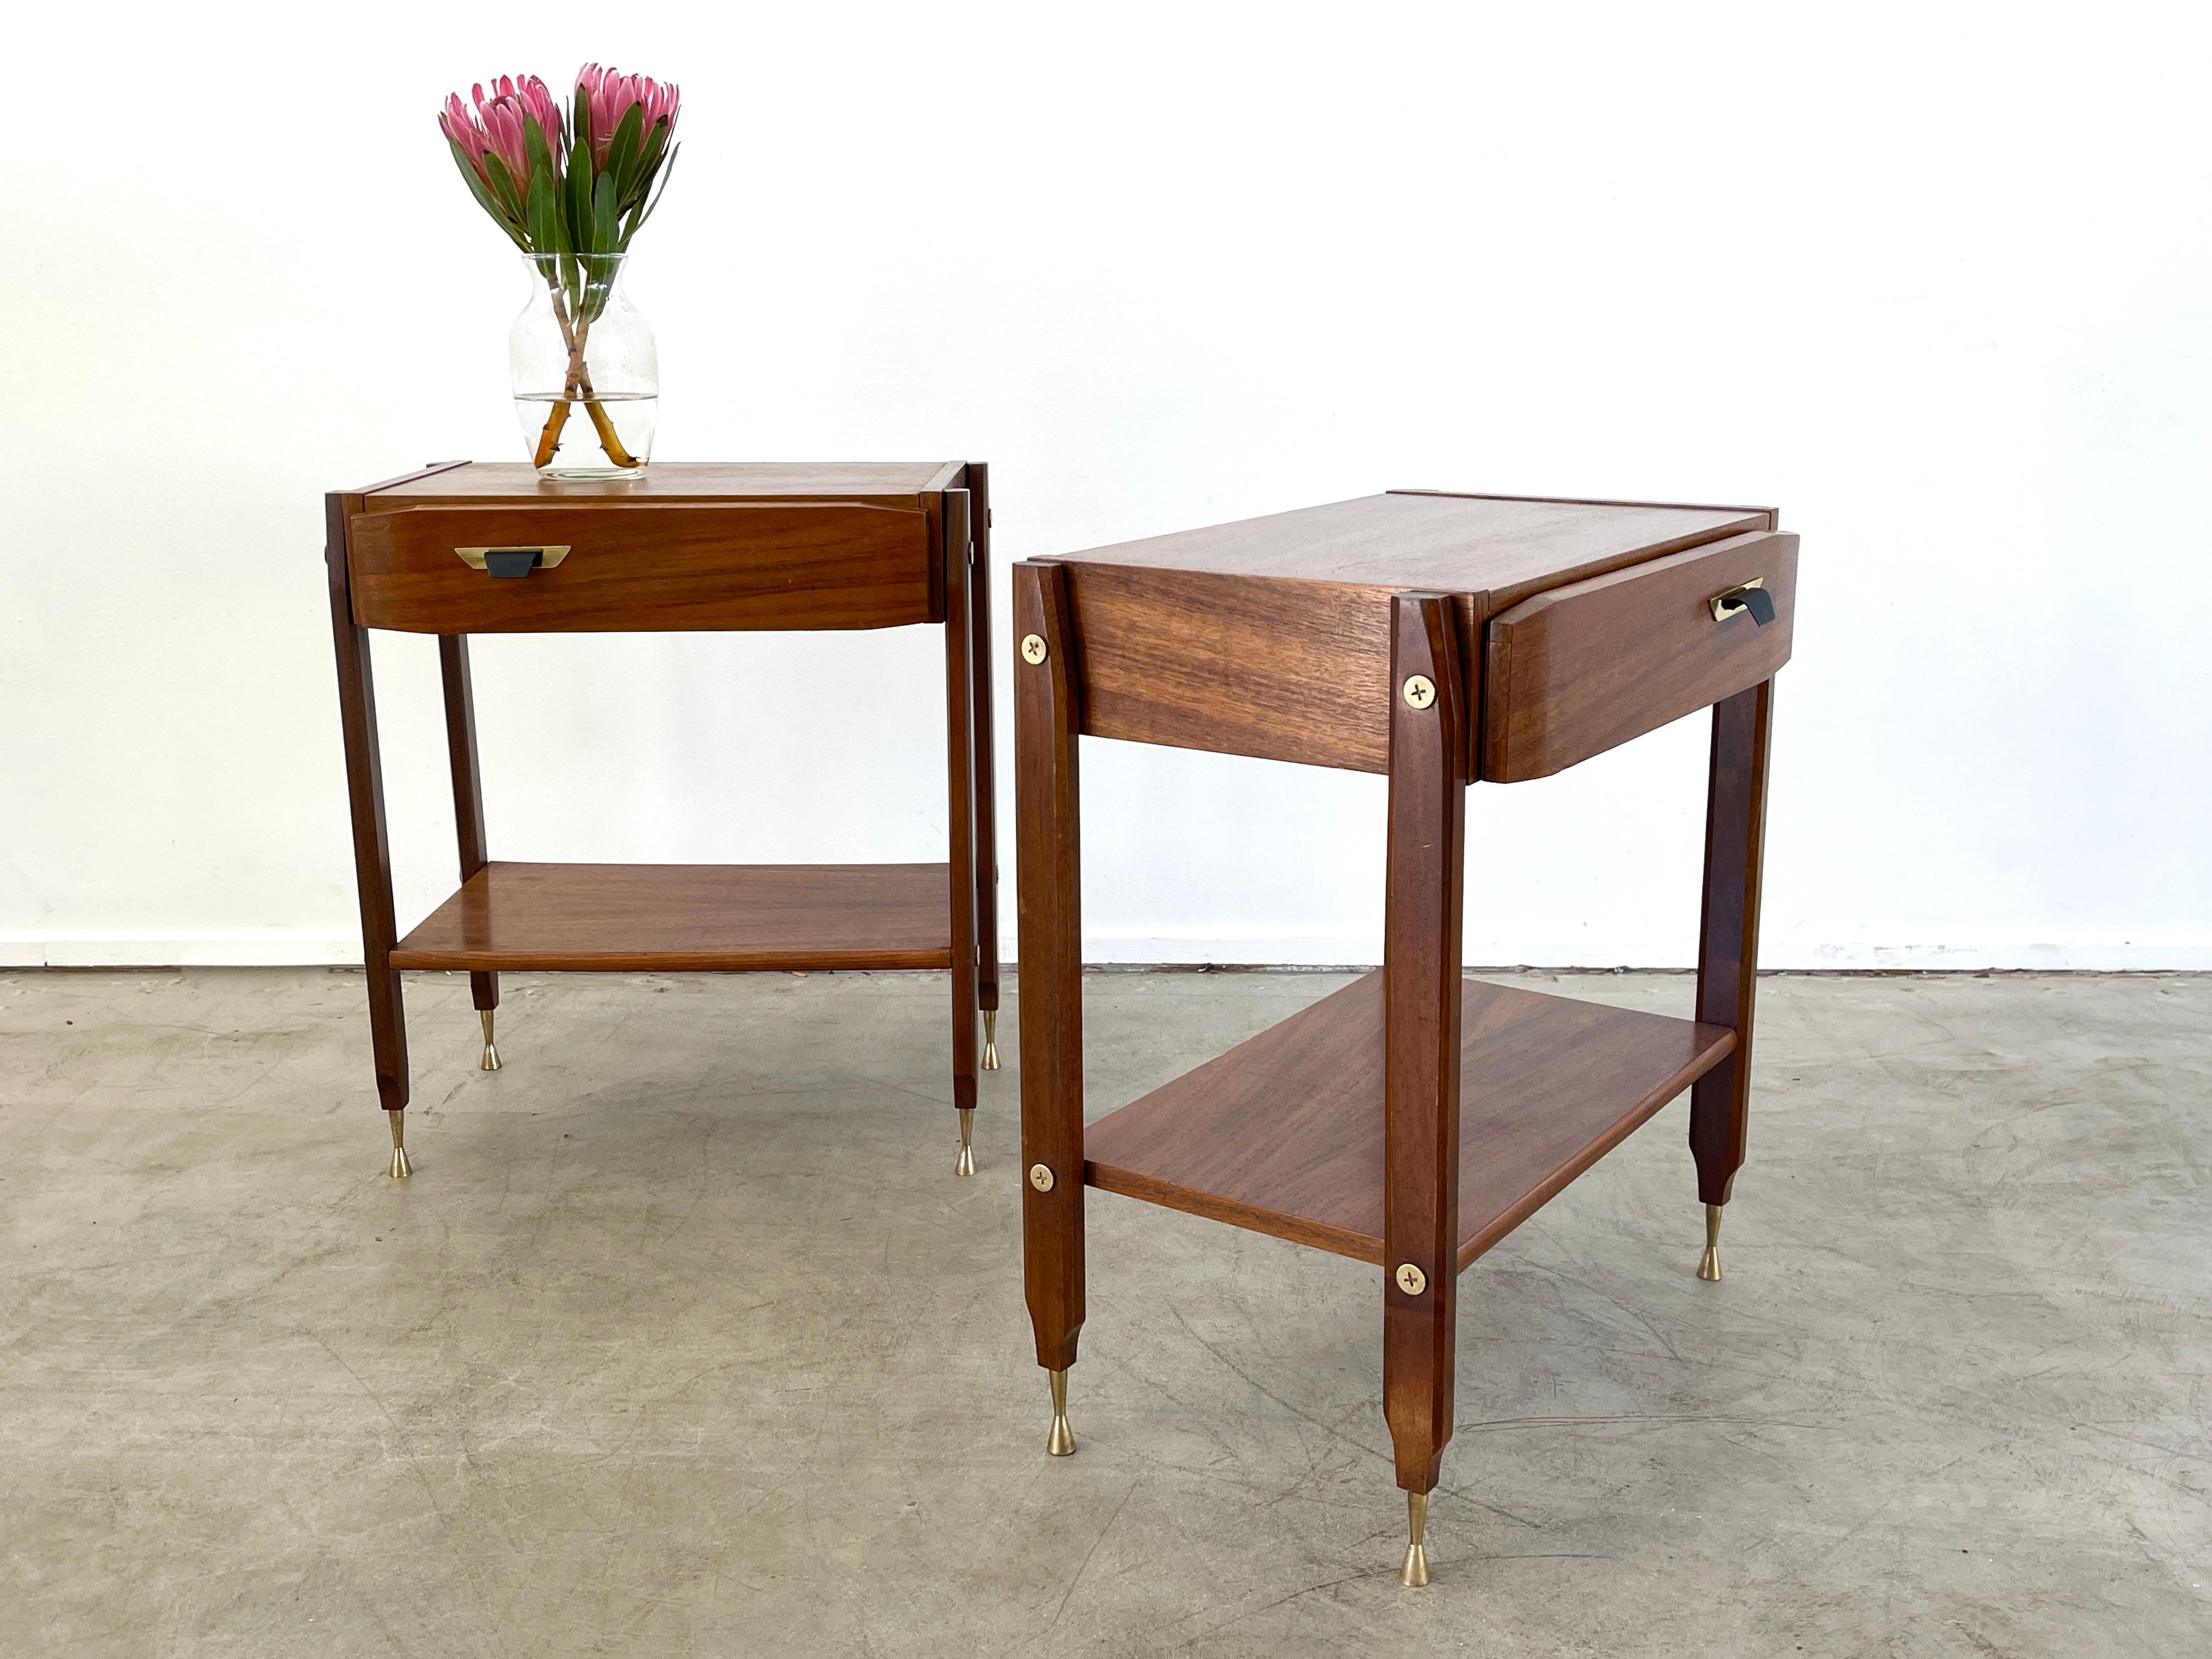 Fantastic pair of unique Italian nightstands constructed of teak, mahogany with brass hardware.
Great angular shaped drawer with tapered legs and solid brass feet.
Contrasting wood on legs 
Great design!